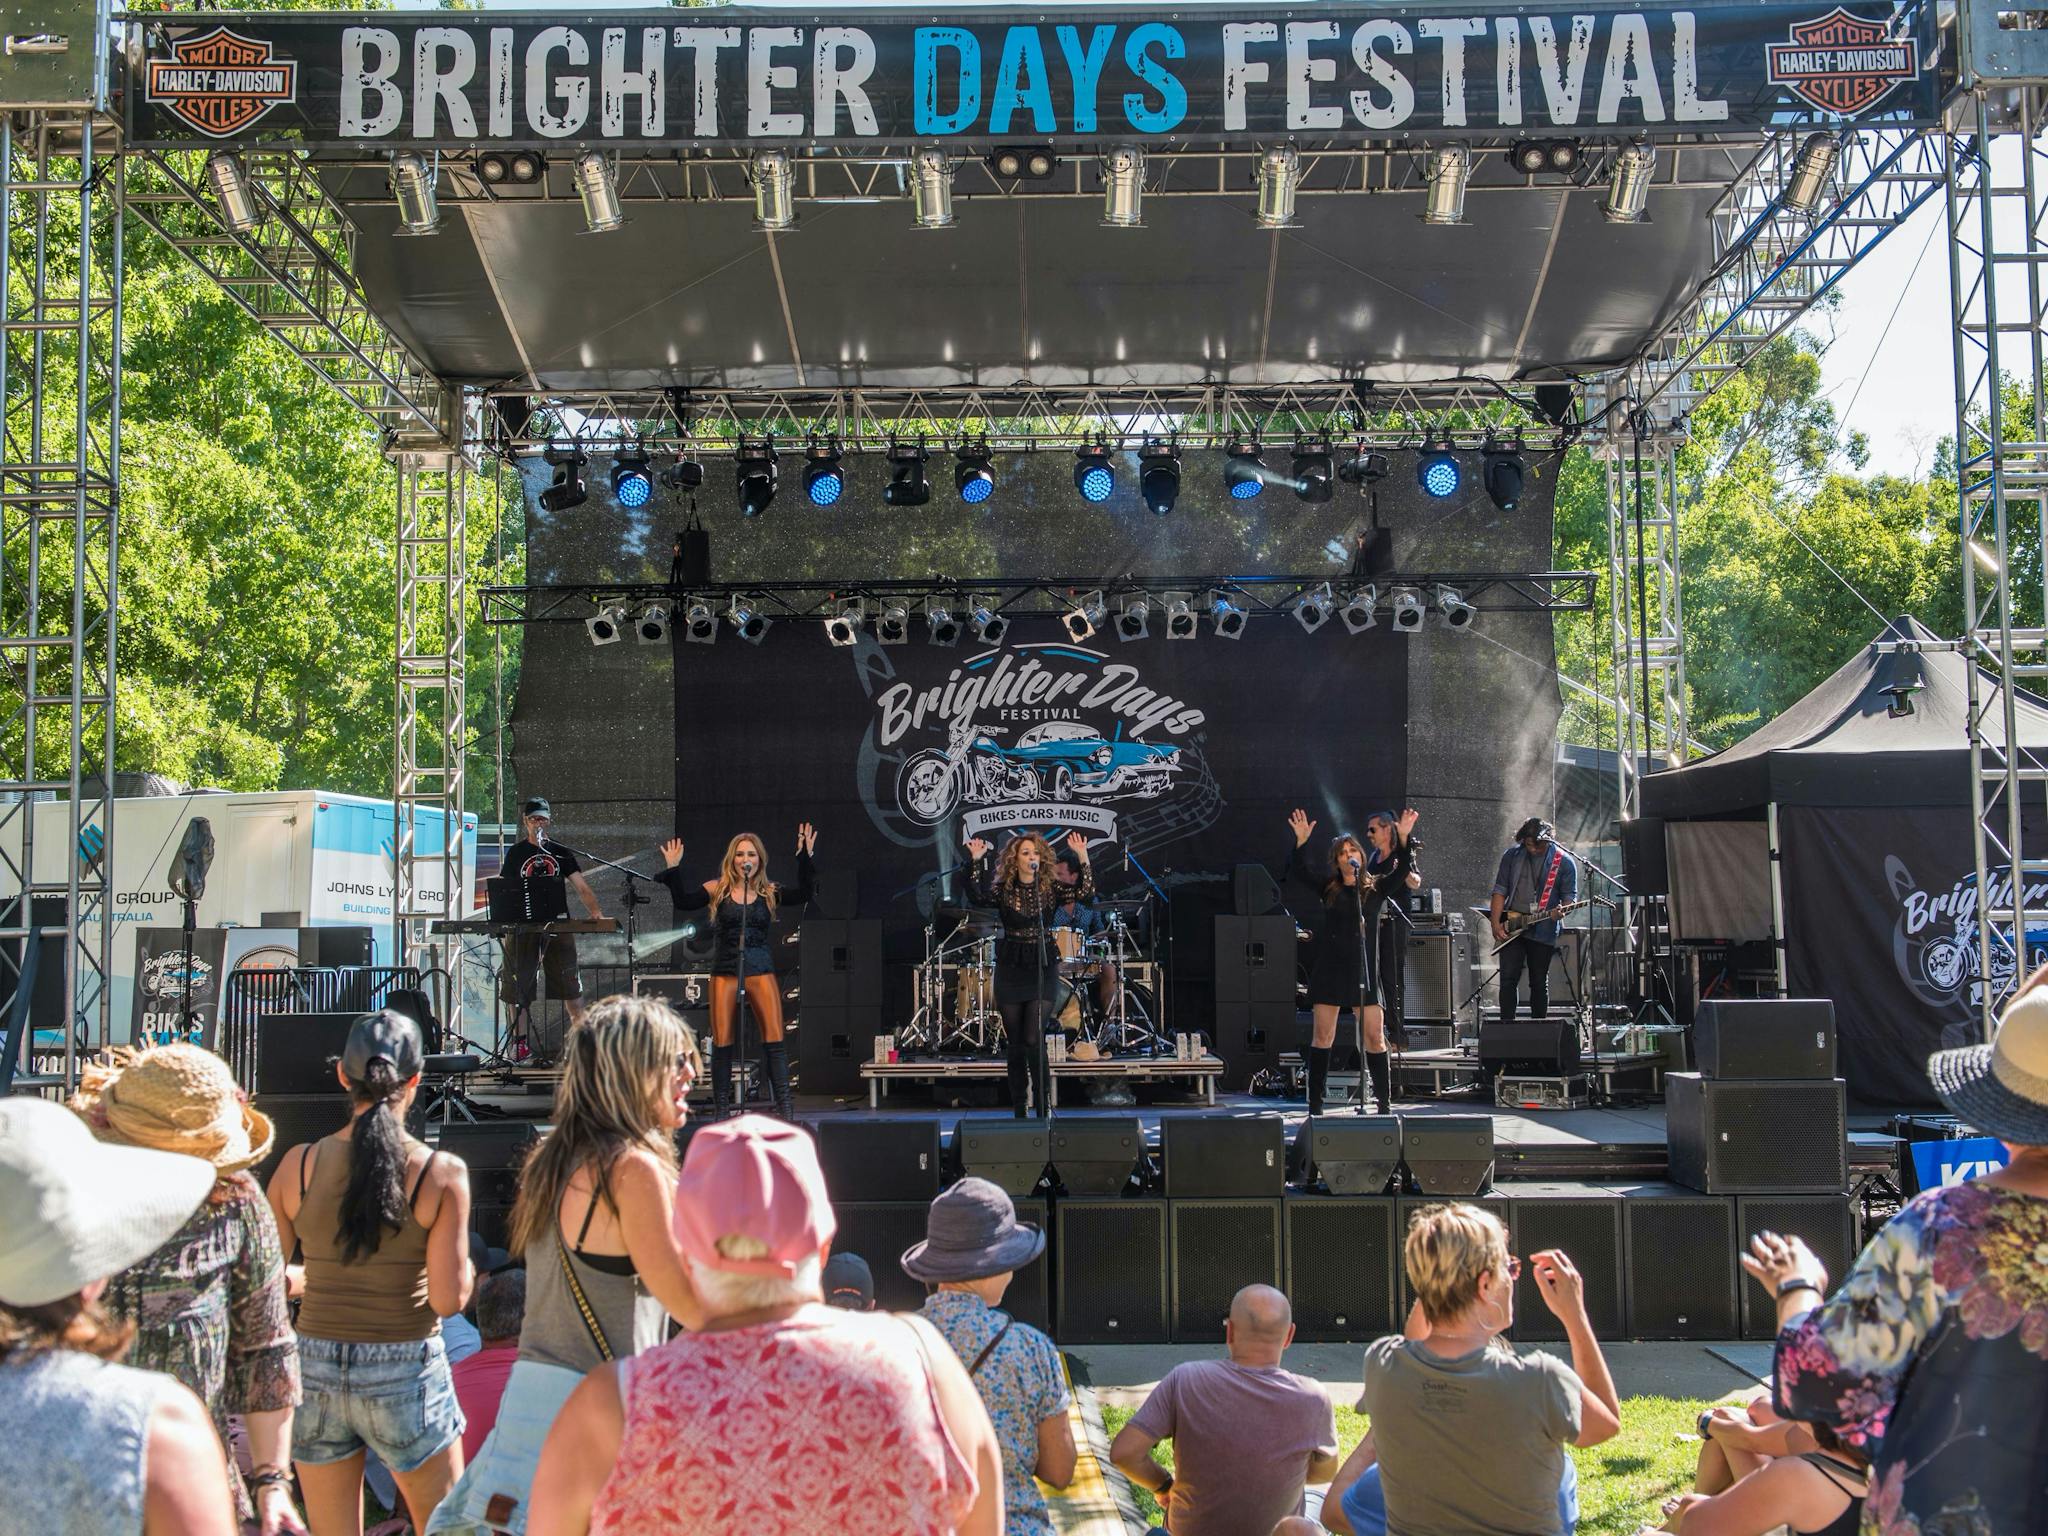 Daytime photo of the crowd in front of the Brighter Days Stage